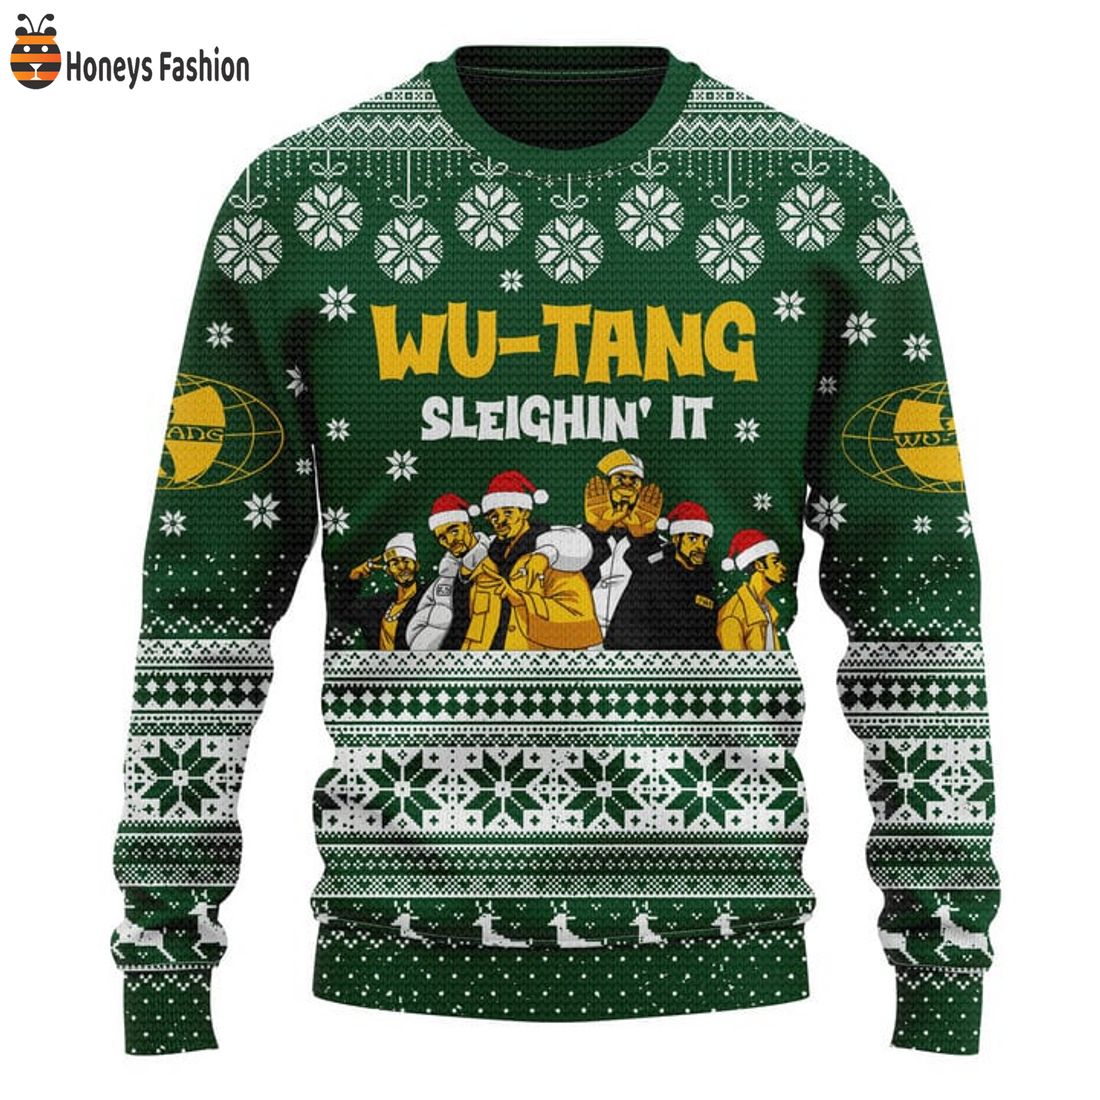 HOT Wu Tang Clan Sleighin’t It Ugly Christmas Sweater